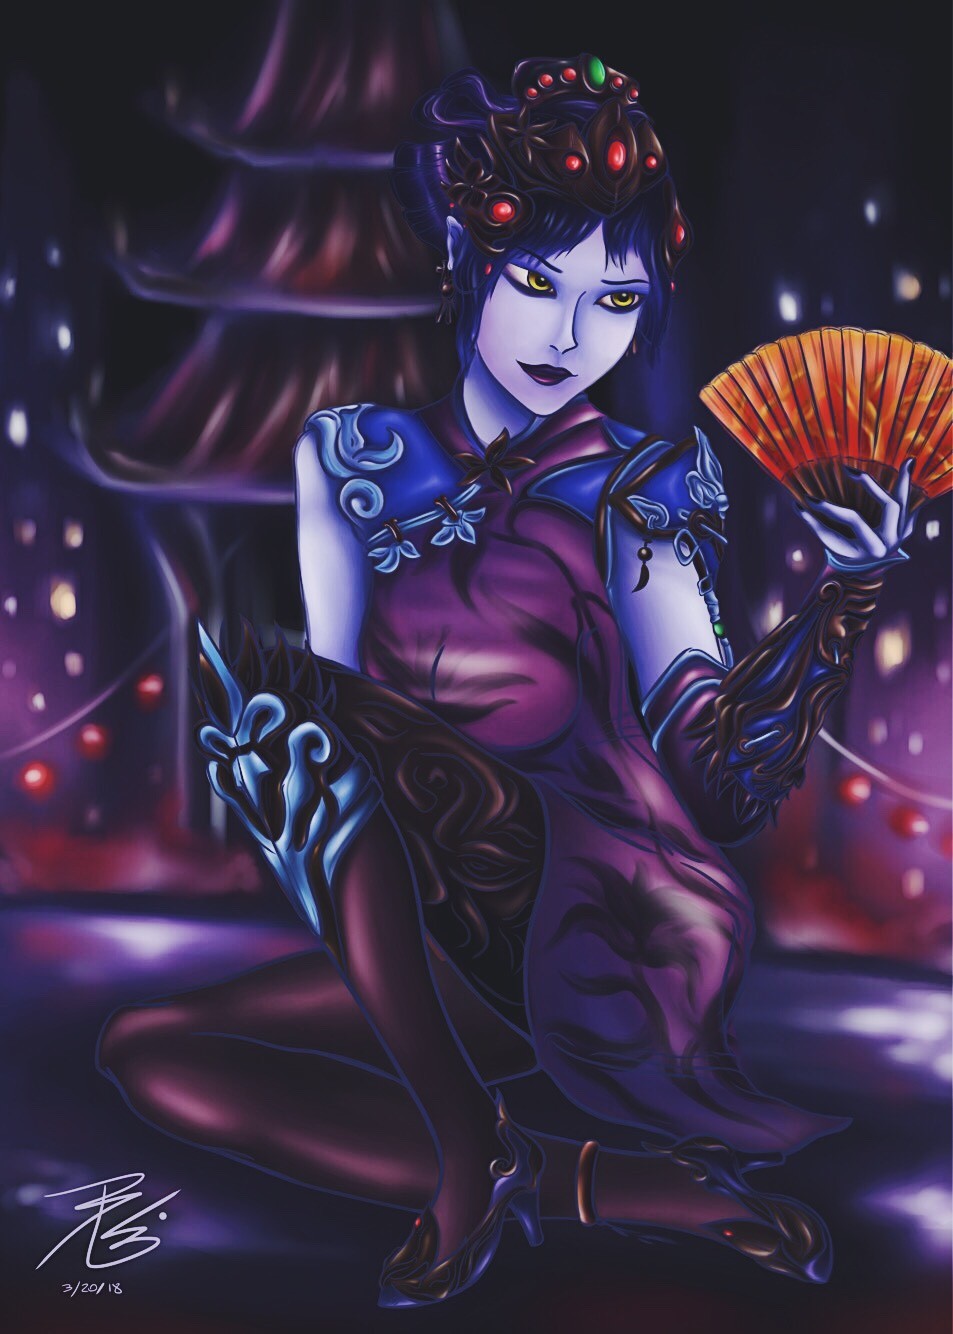 Overwatch] As part of her Black Lily skin, Widowmaker's